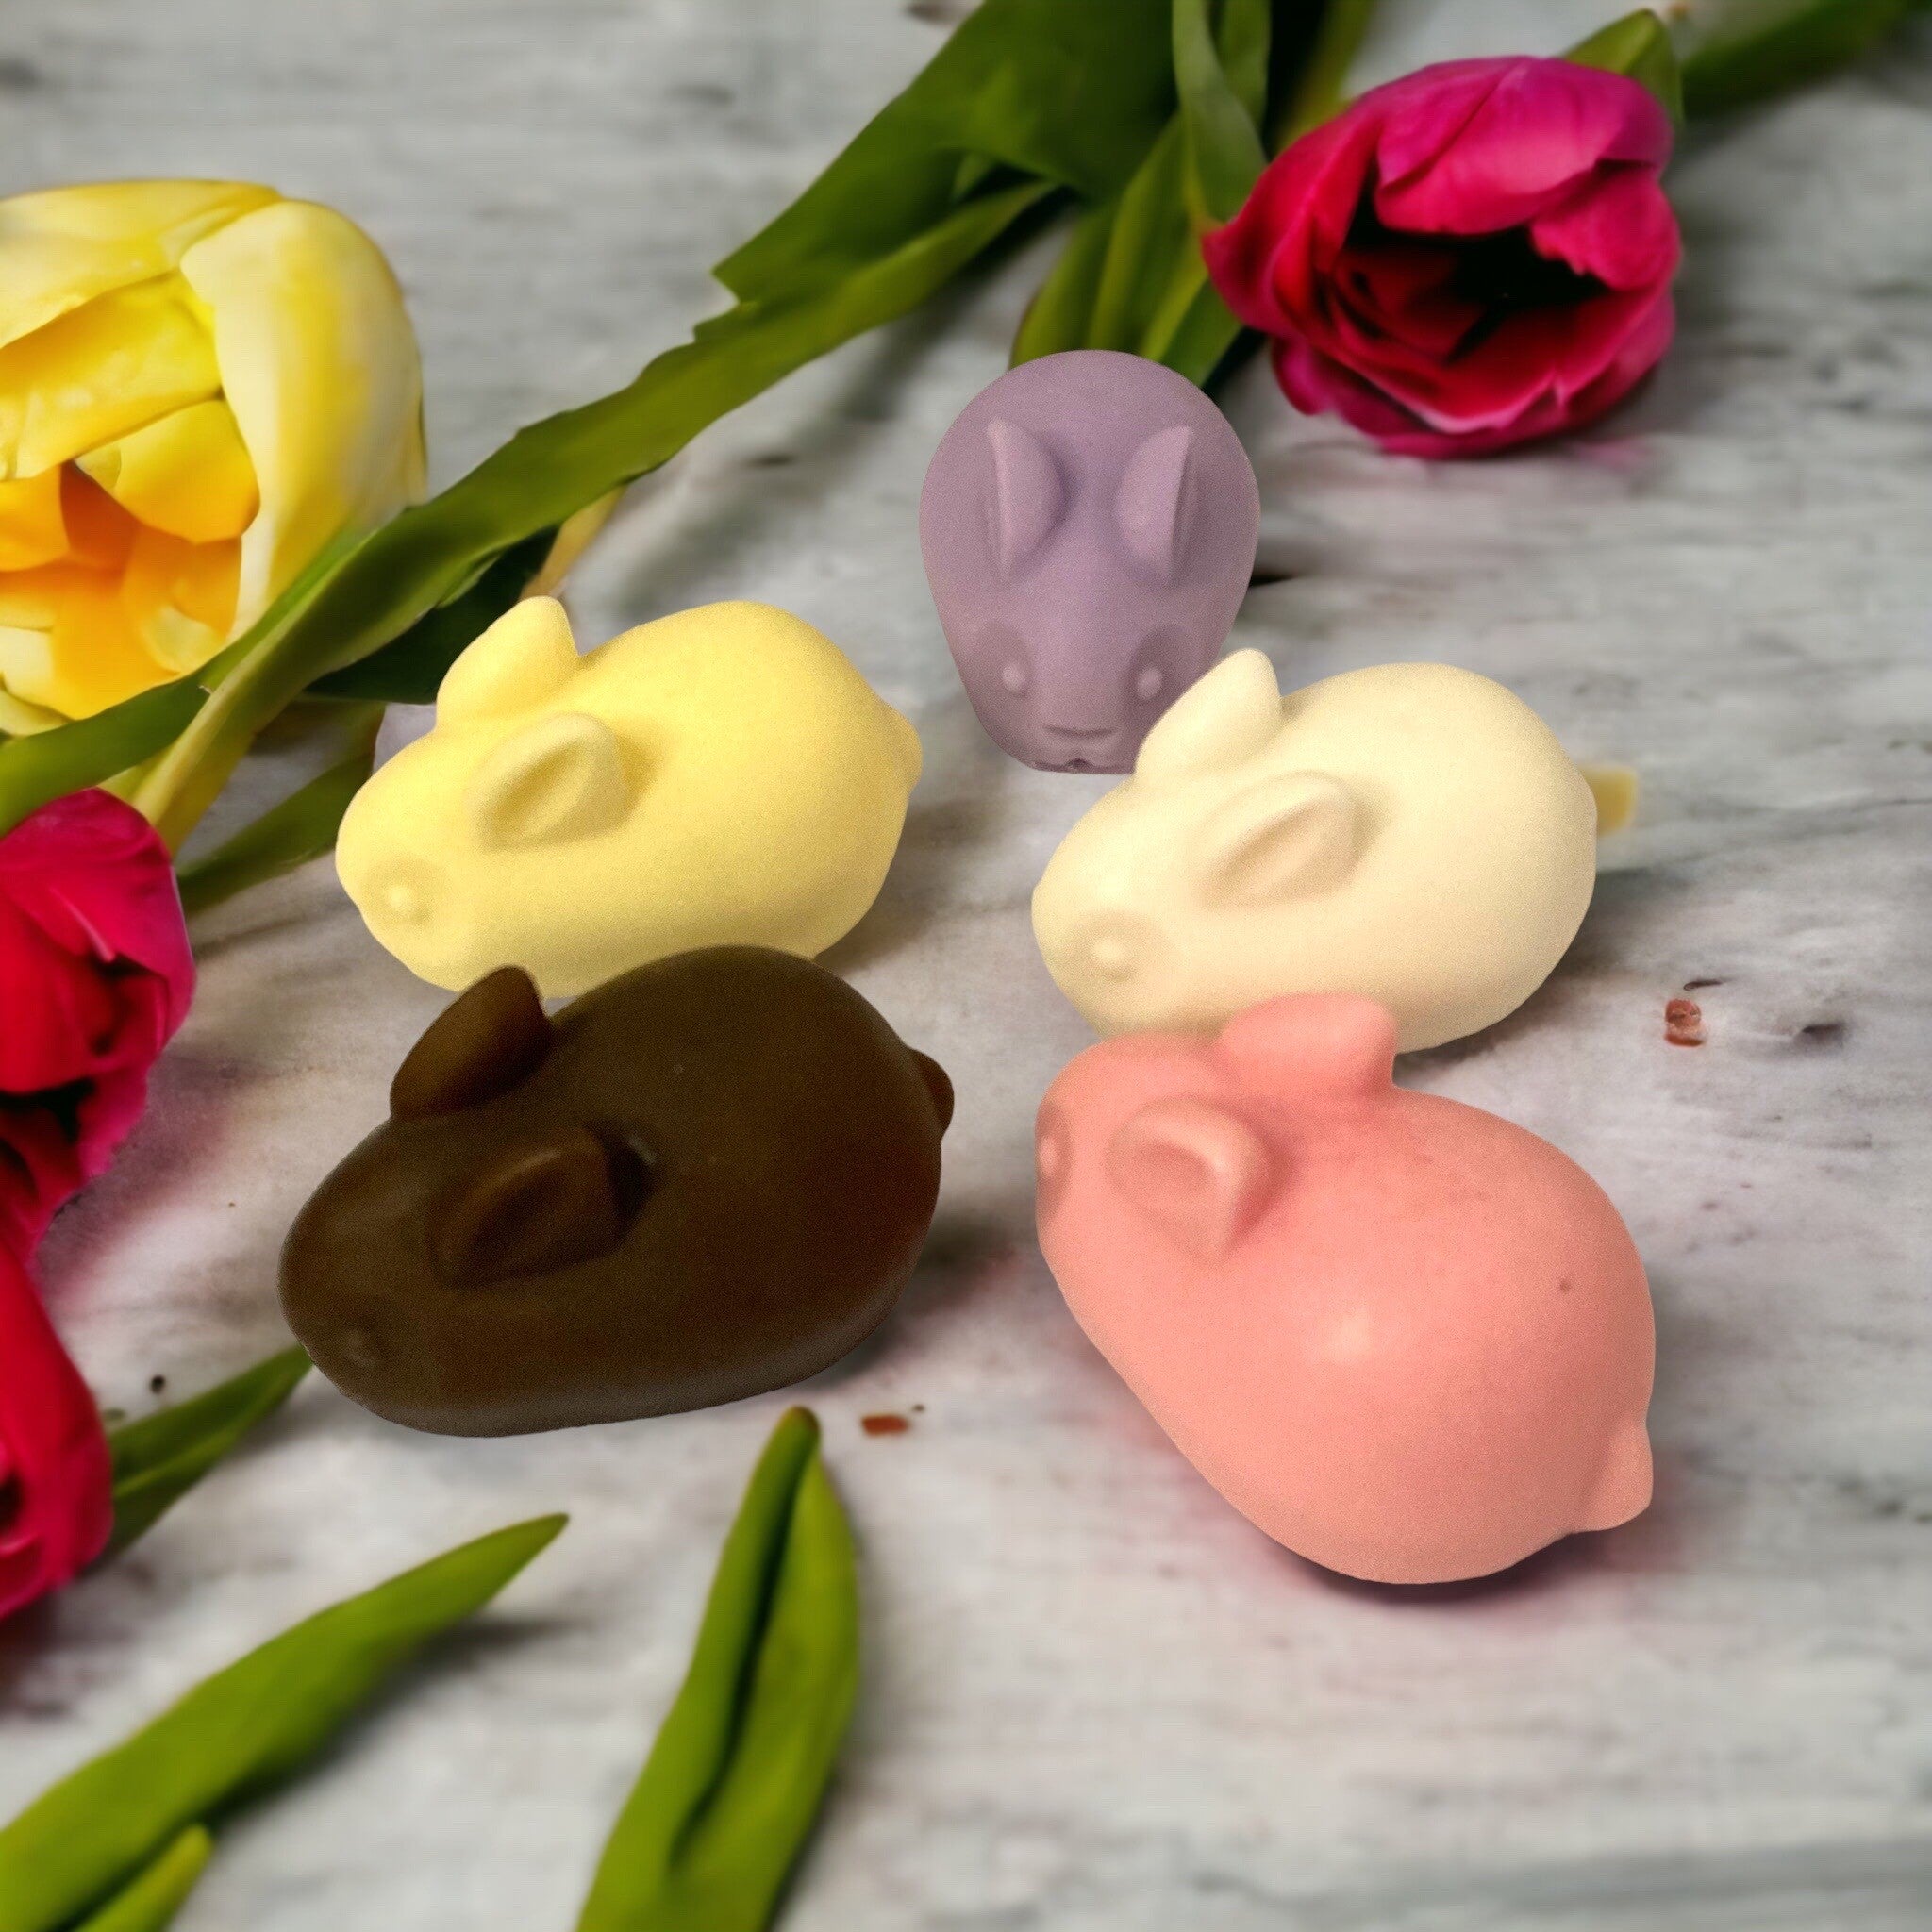 Spring has arrived at the soap shop!